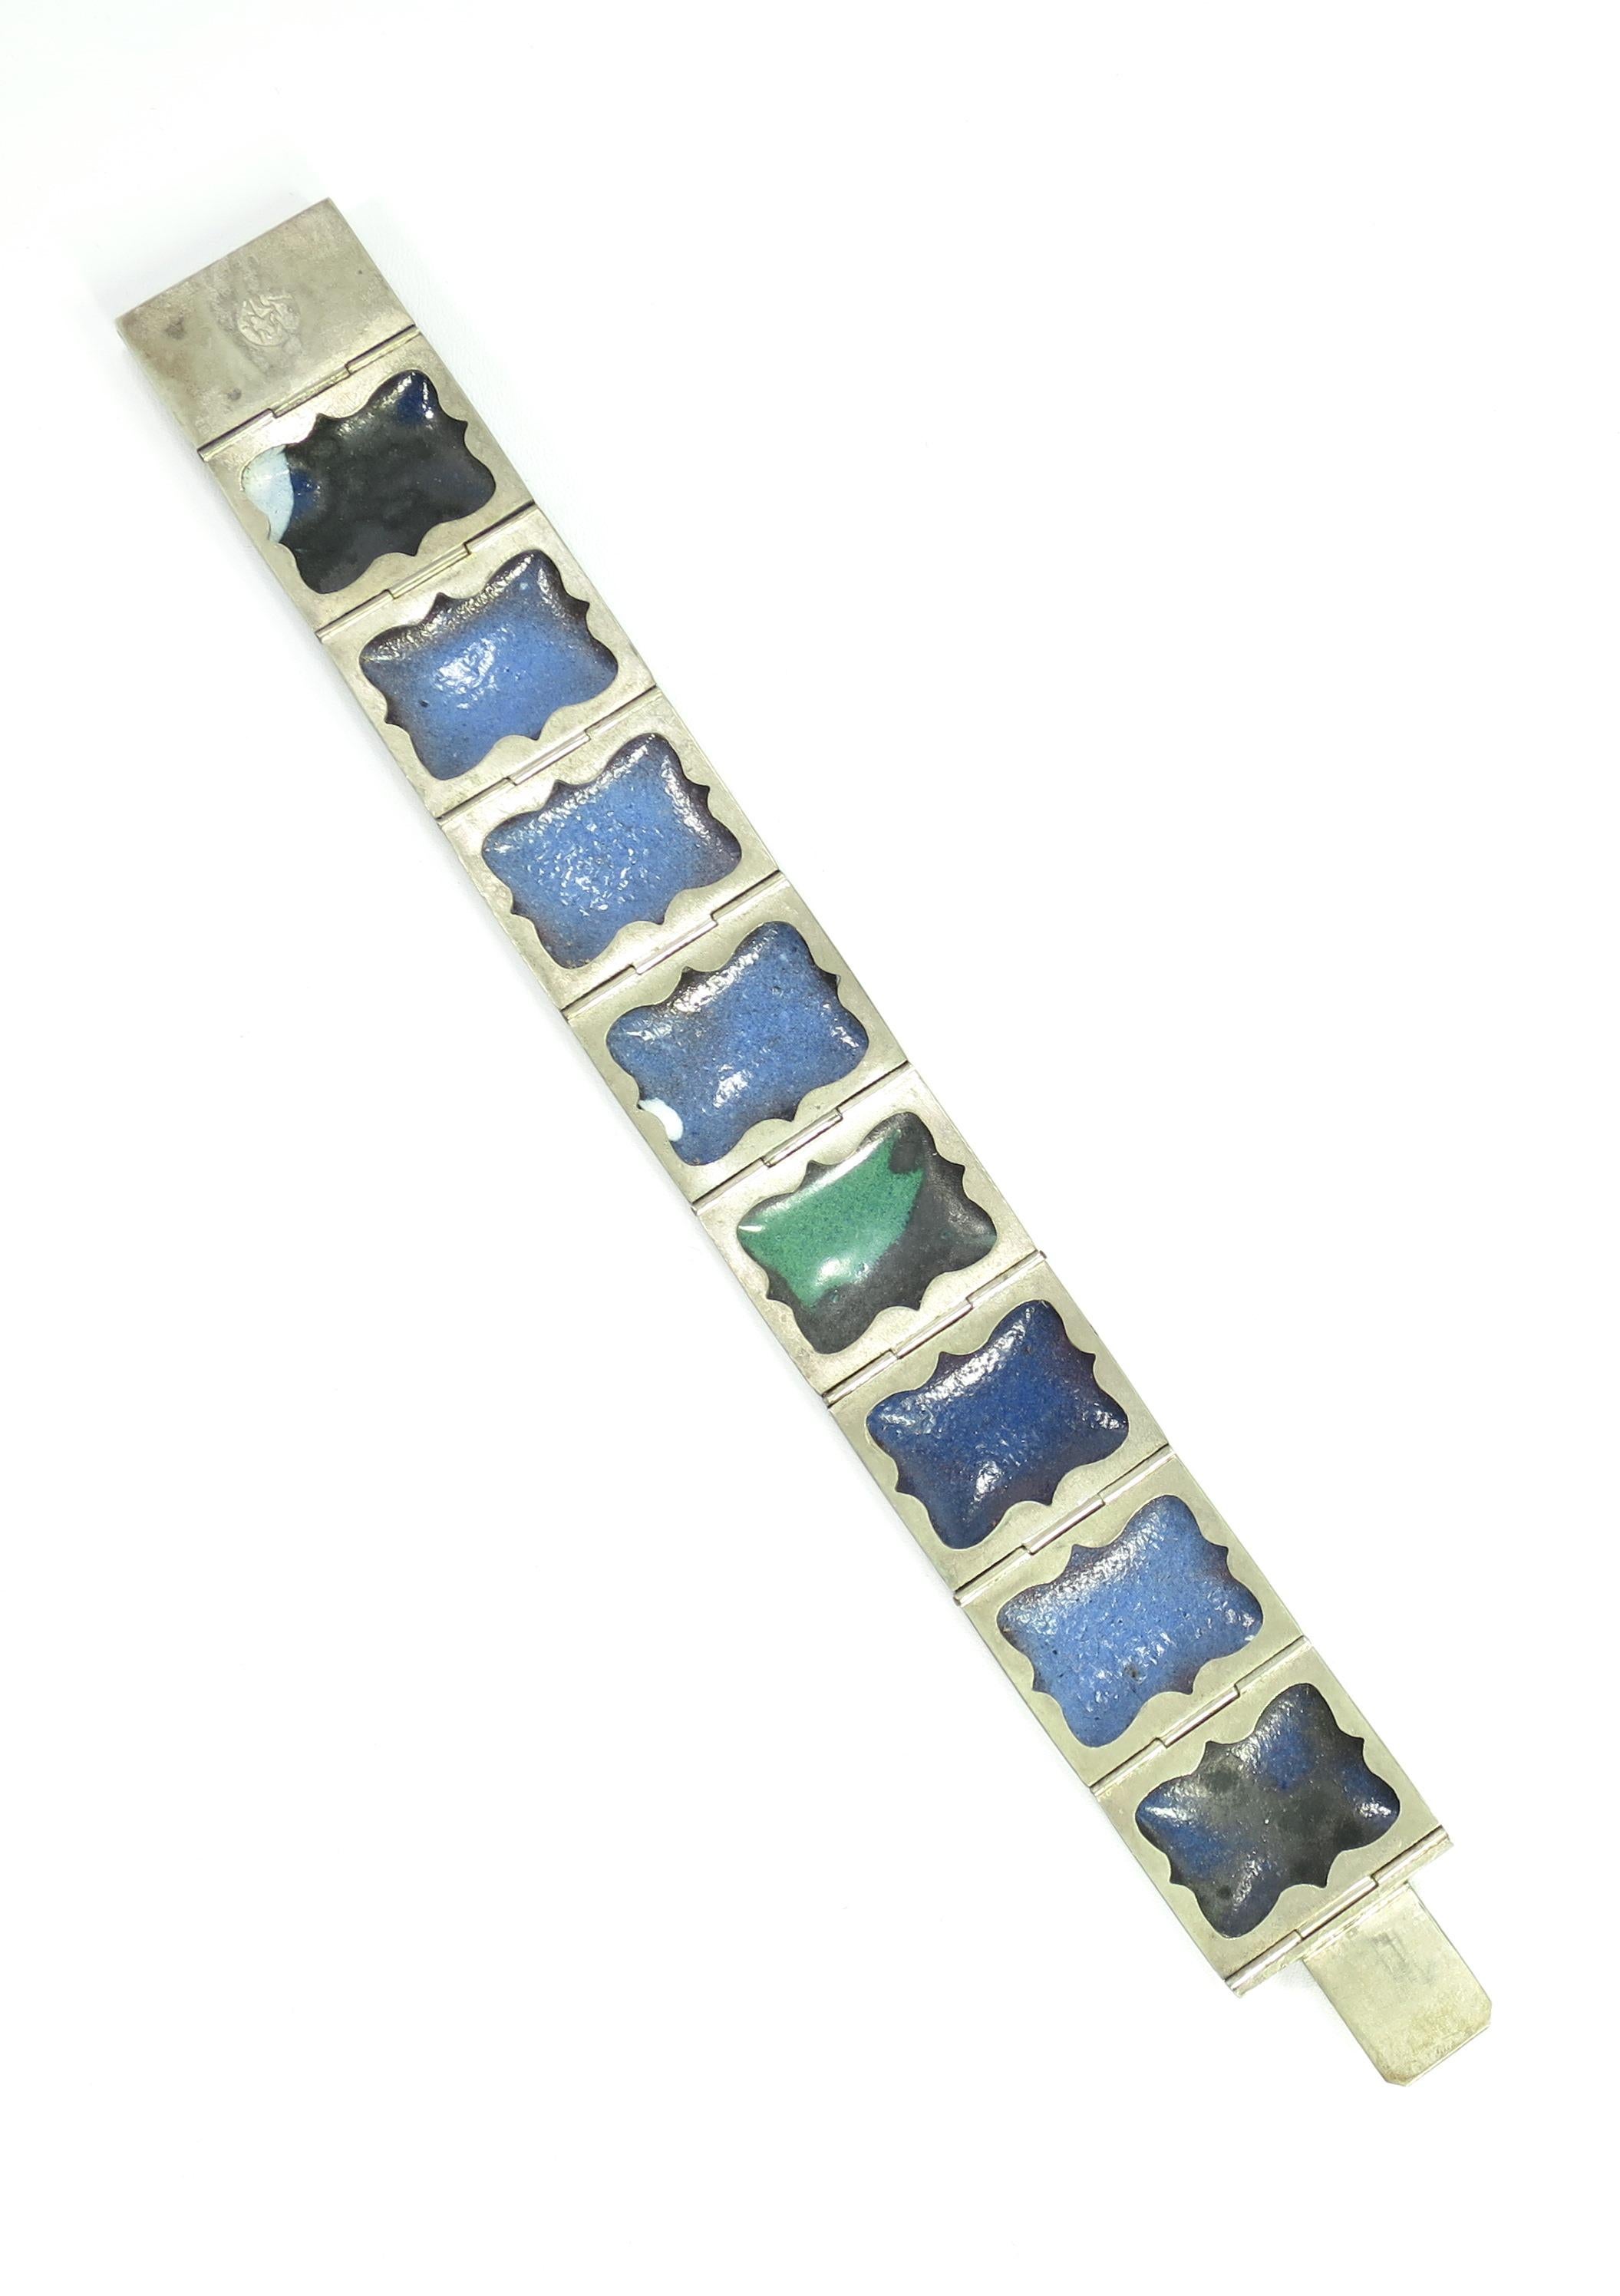 Persian Isfahan Silver Enamel Articulated Panel Bracelet, Artist-Signed 1930s For Sale 8